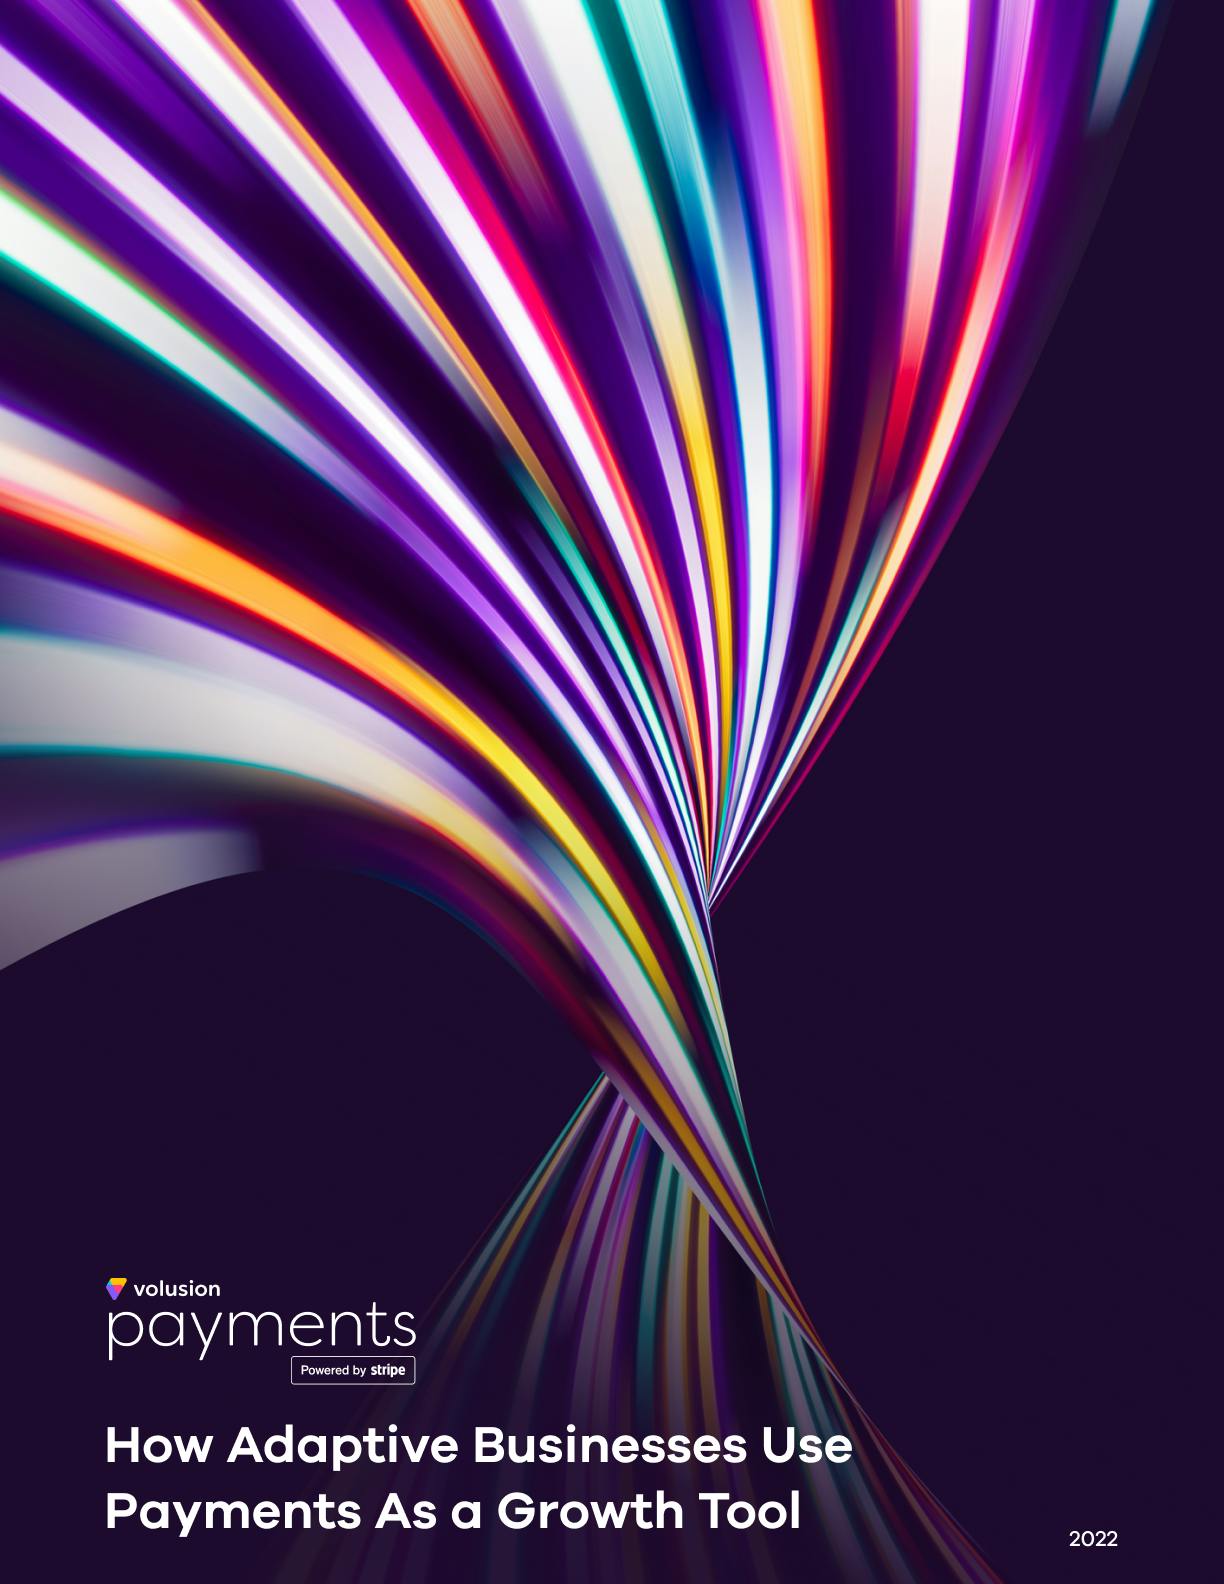 How Adaptive Businesses Use Payments as a Growth Tool